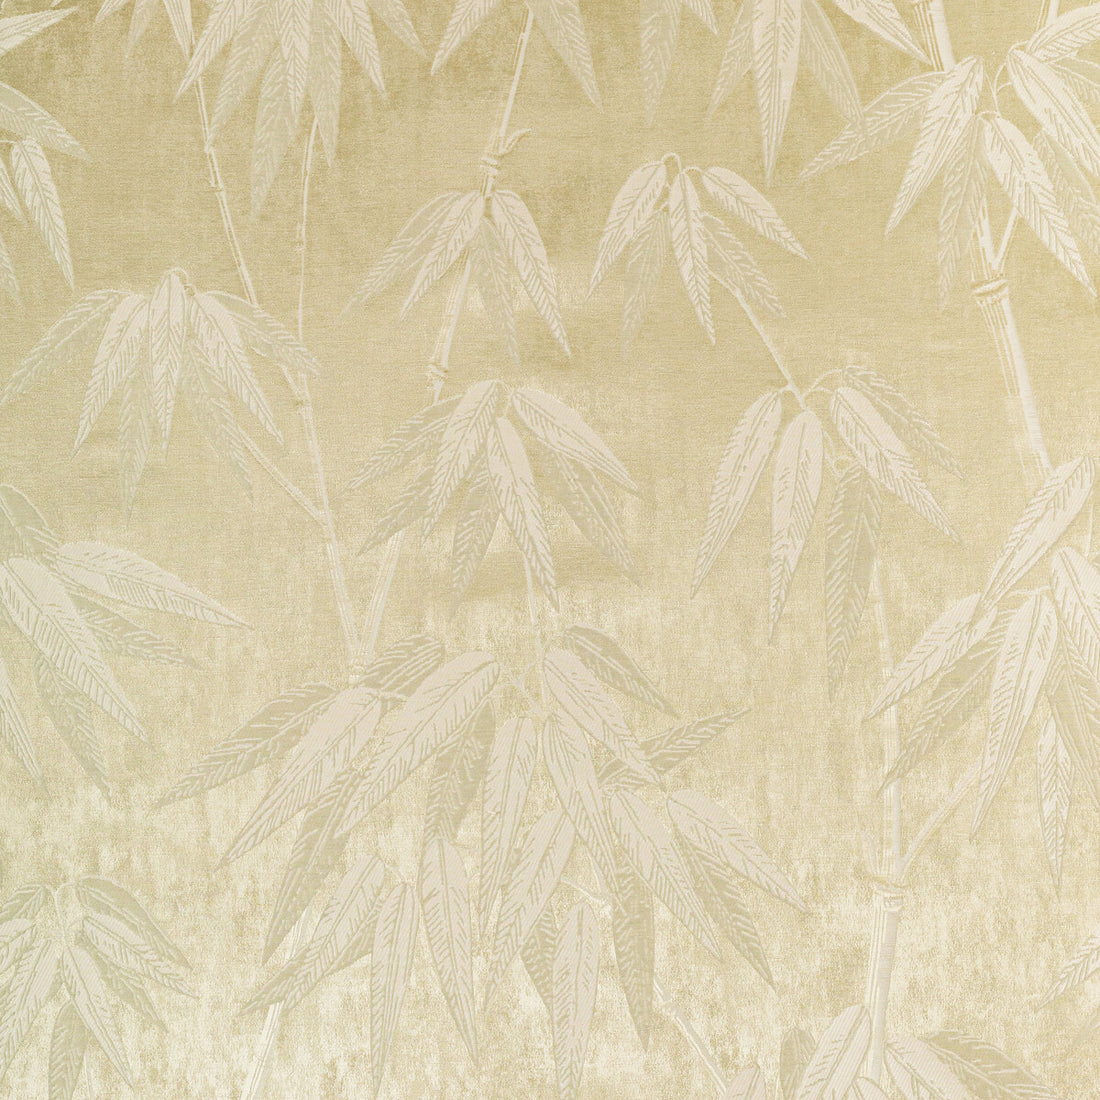 Bamboo Chic fabric in gold color - pattern 4958.416.0 - by Kravet Couture in the Modern Luxe Silk Luster collection